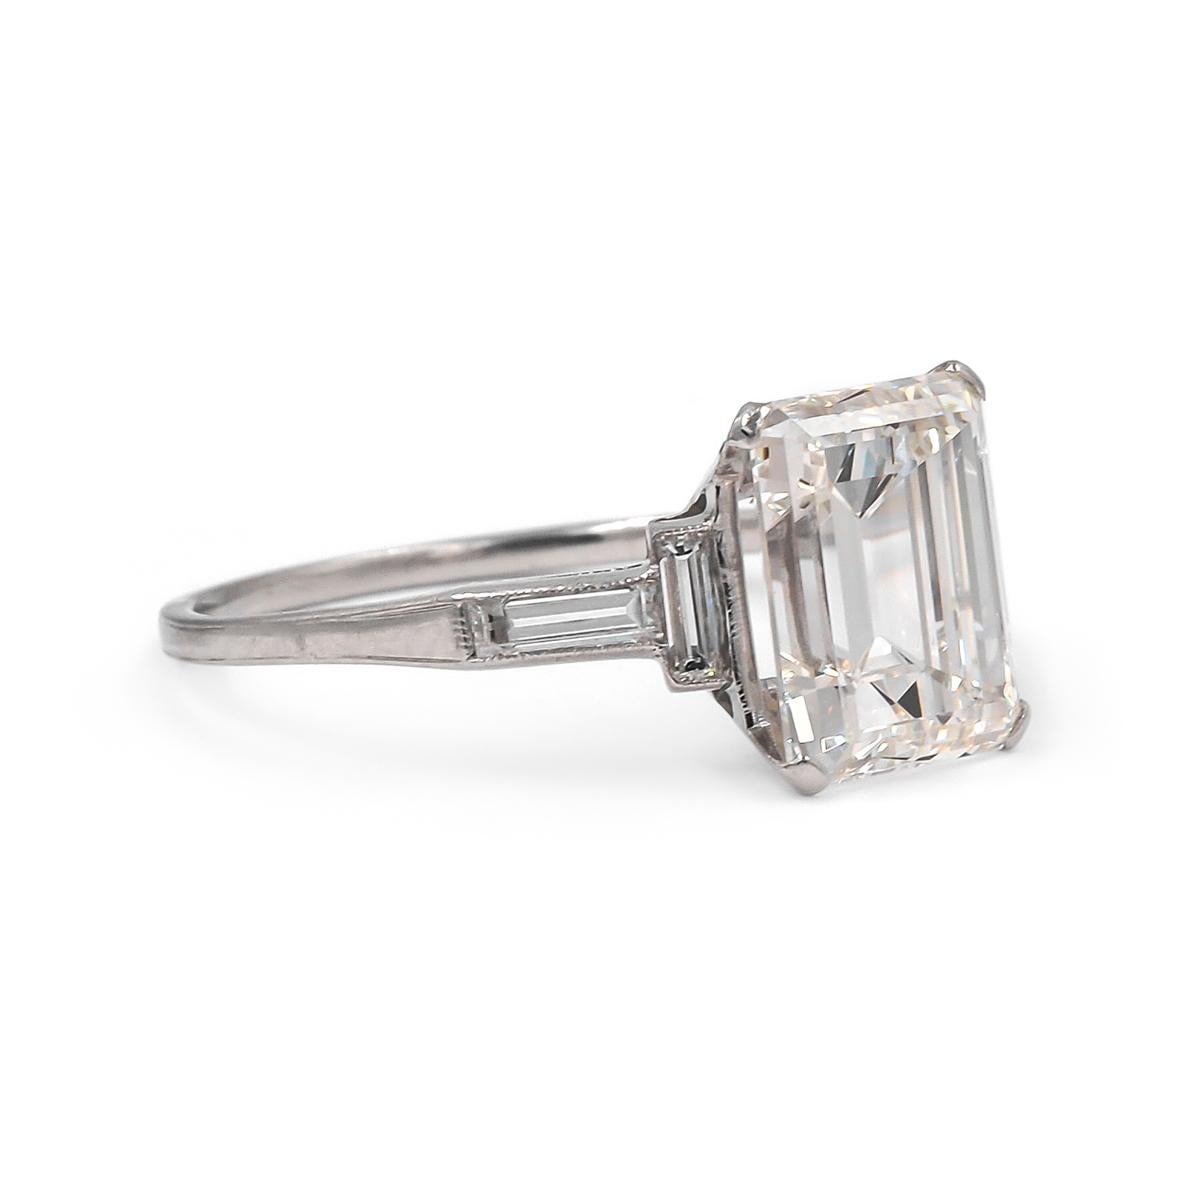 Clean lines embody this classic Art Deco engagement ring of French Origin. Composed of Platinum & featuring a spectacular GIA certified 3.07 Carat Emerald Cut Diamond, I color and VIS1 clarity. Flanked by 4 Straight Baguette Cut Diamonds weighing